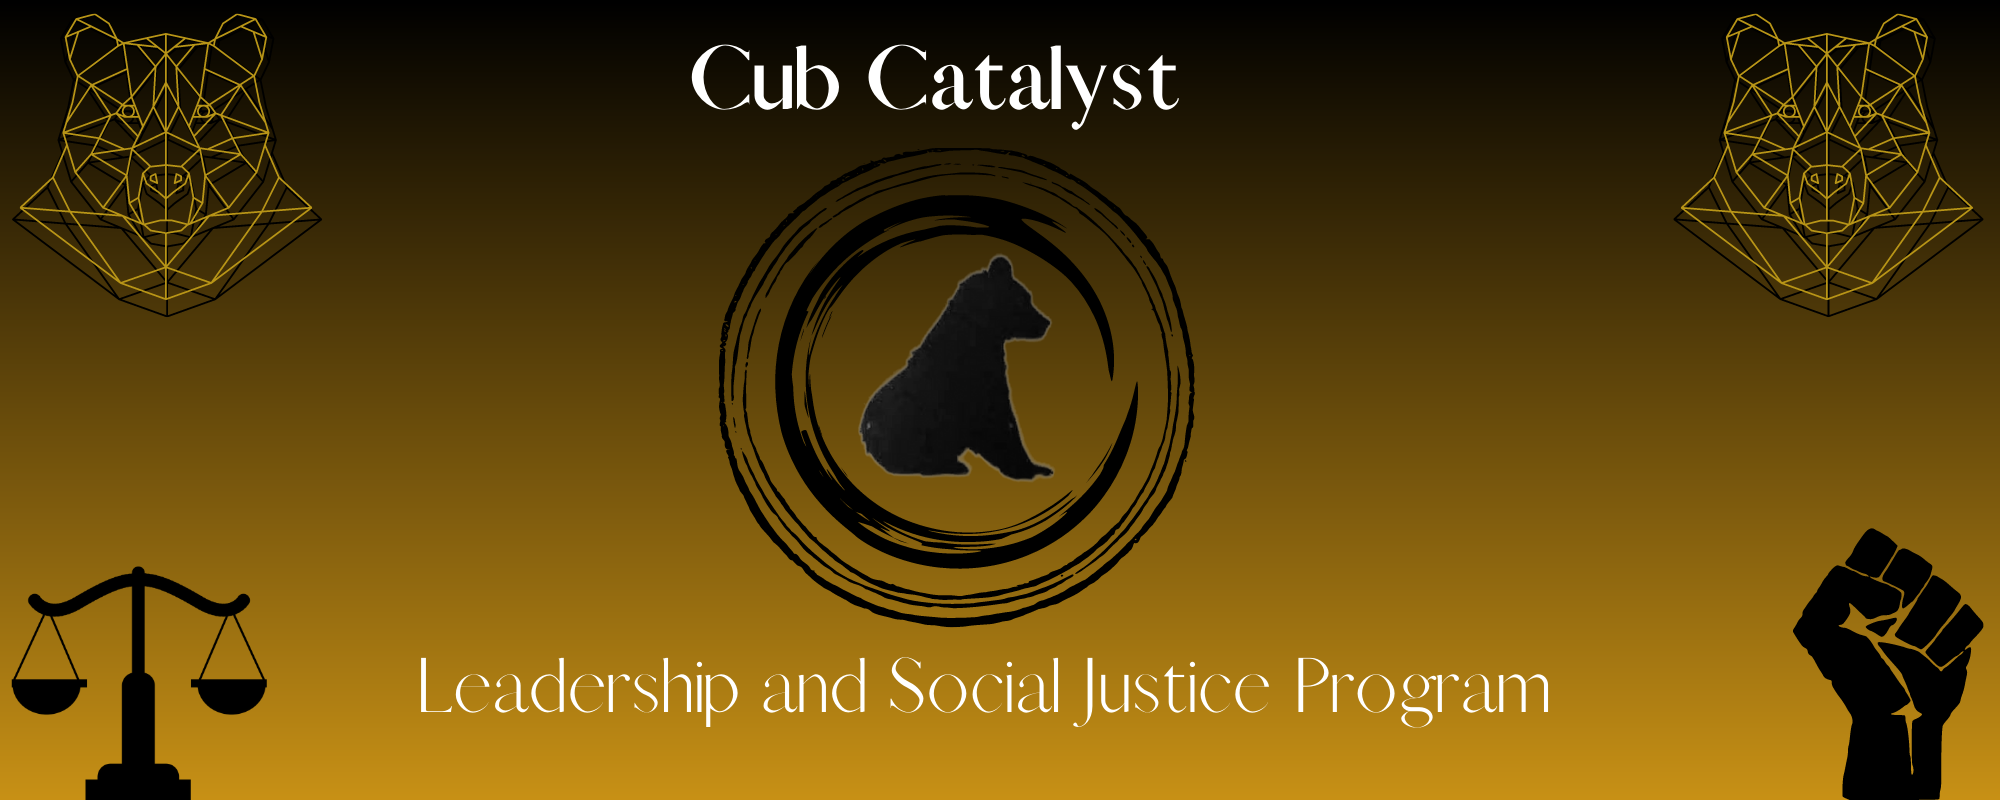 Cub Catalyst Welcome Page Banner